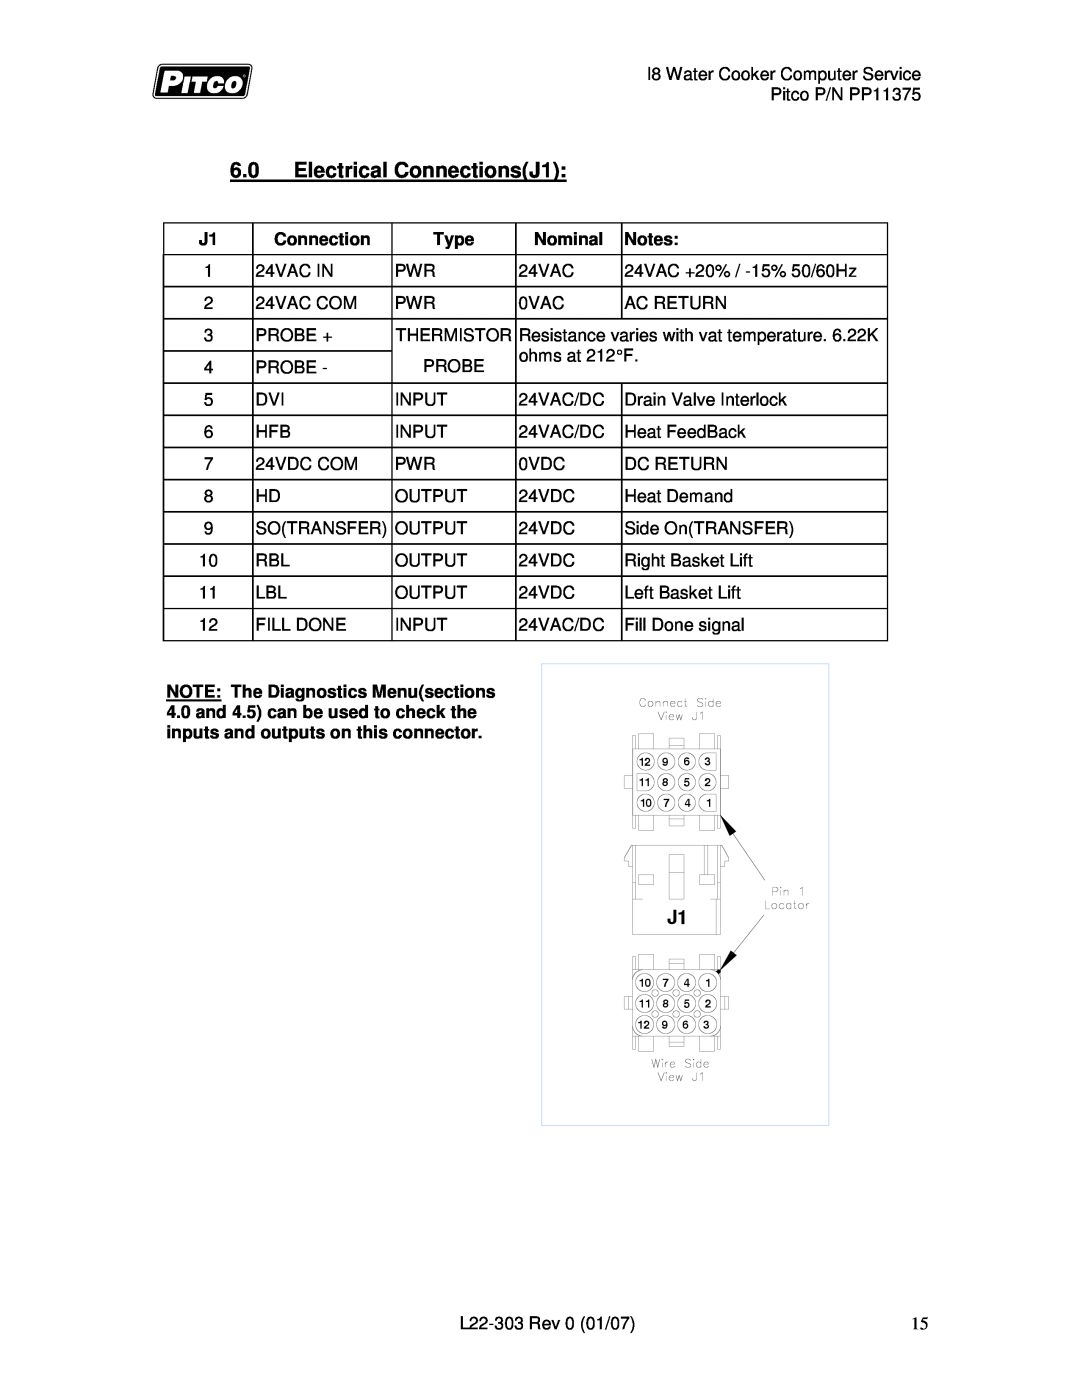 Pitco Frialator L22-303 service manual 6.0Electrical ConnectionsJ1 